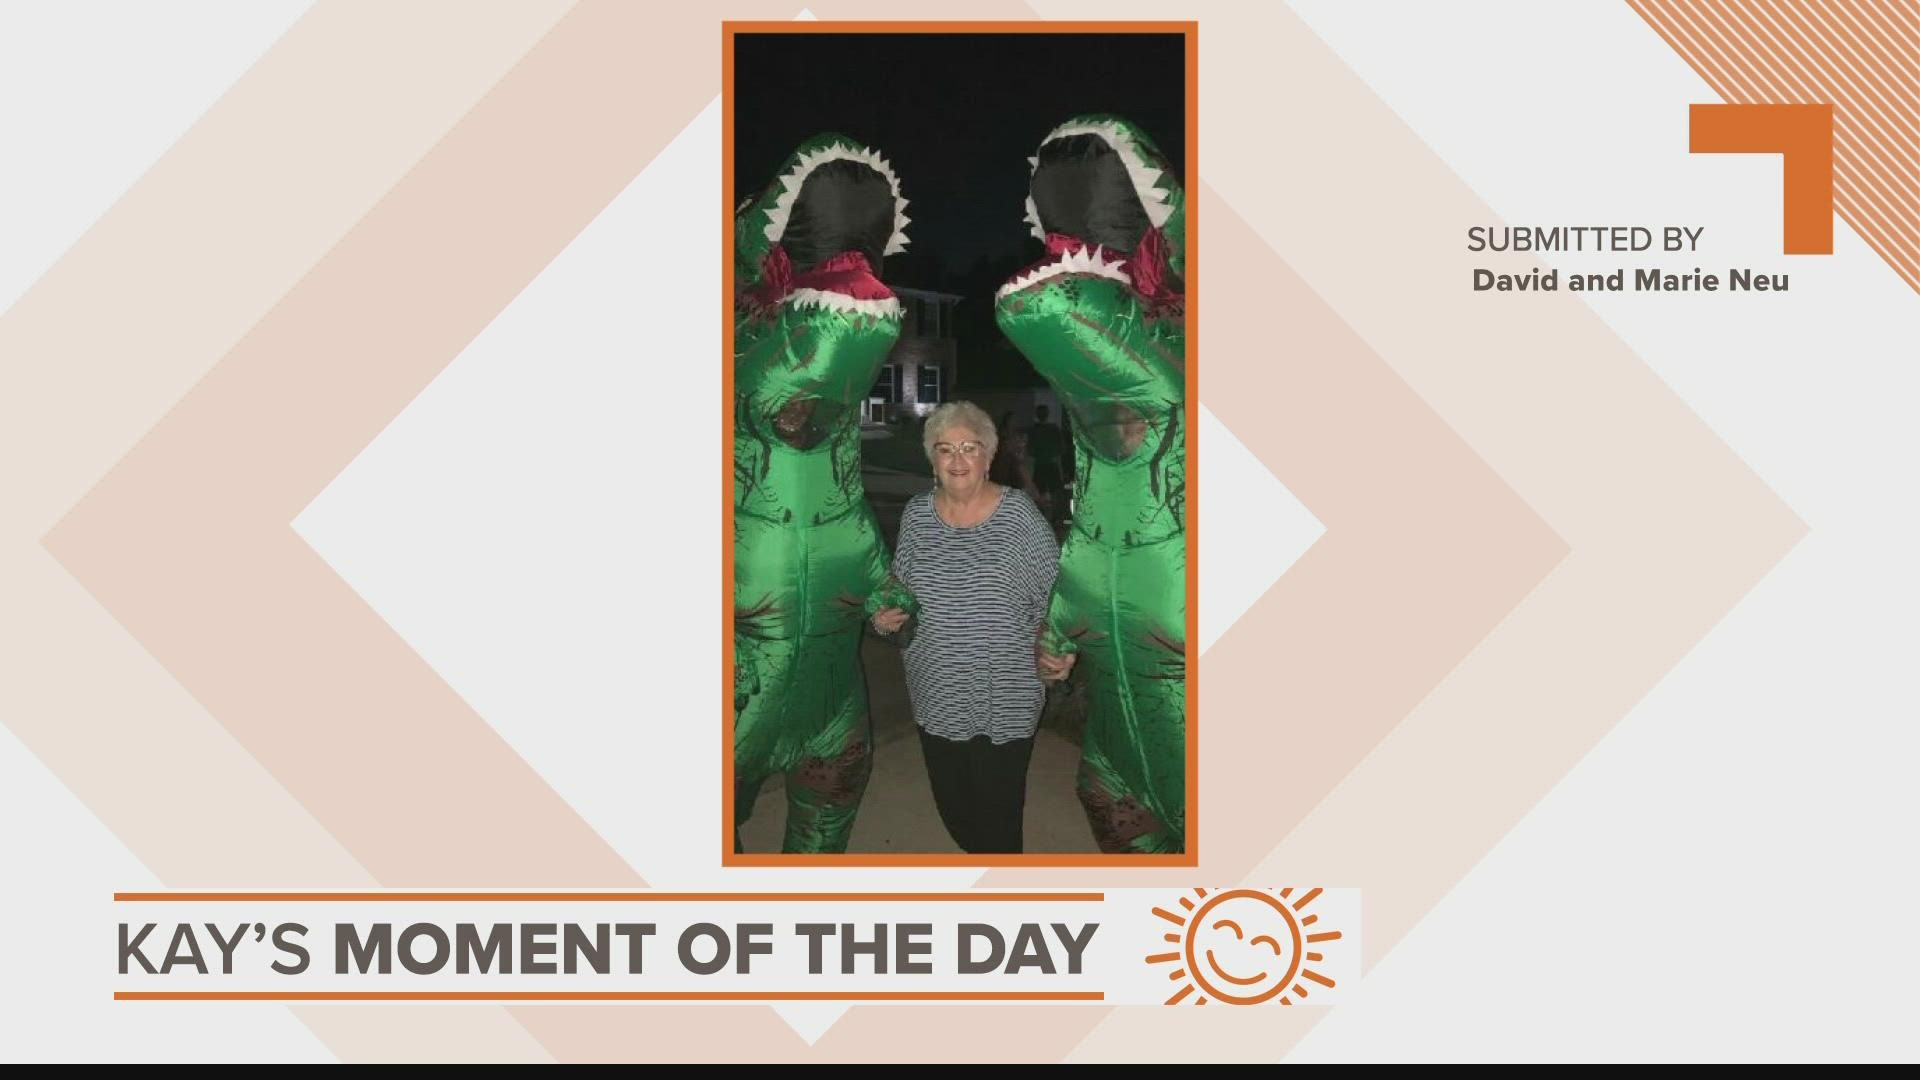 Kay's Moment of the Day for Oct. 12